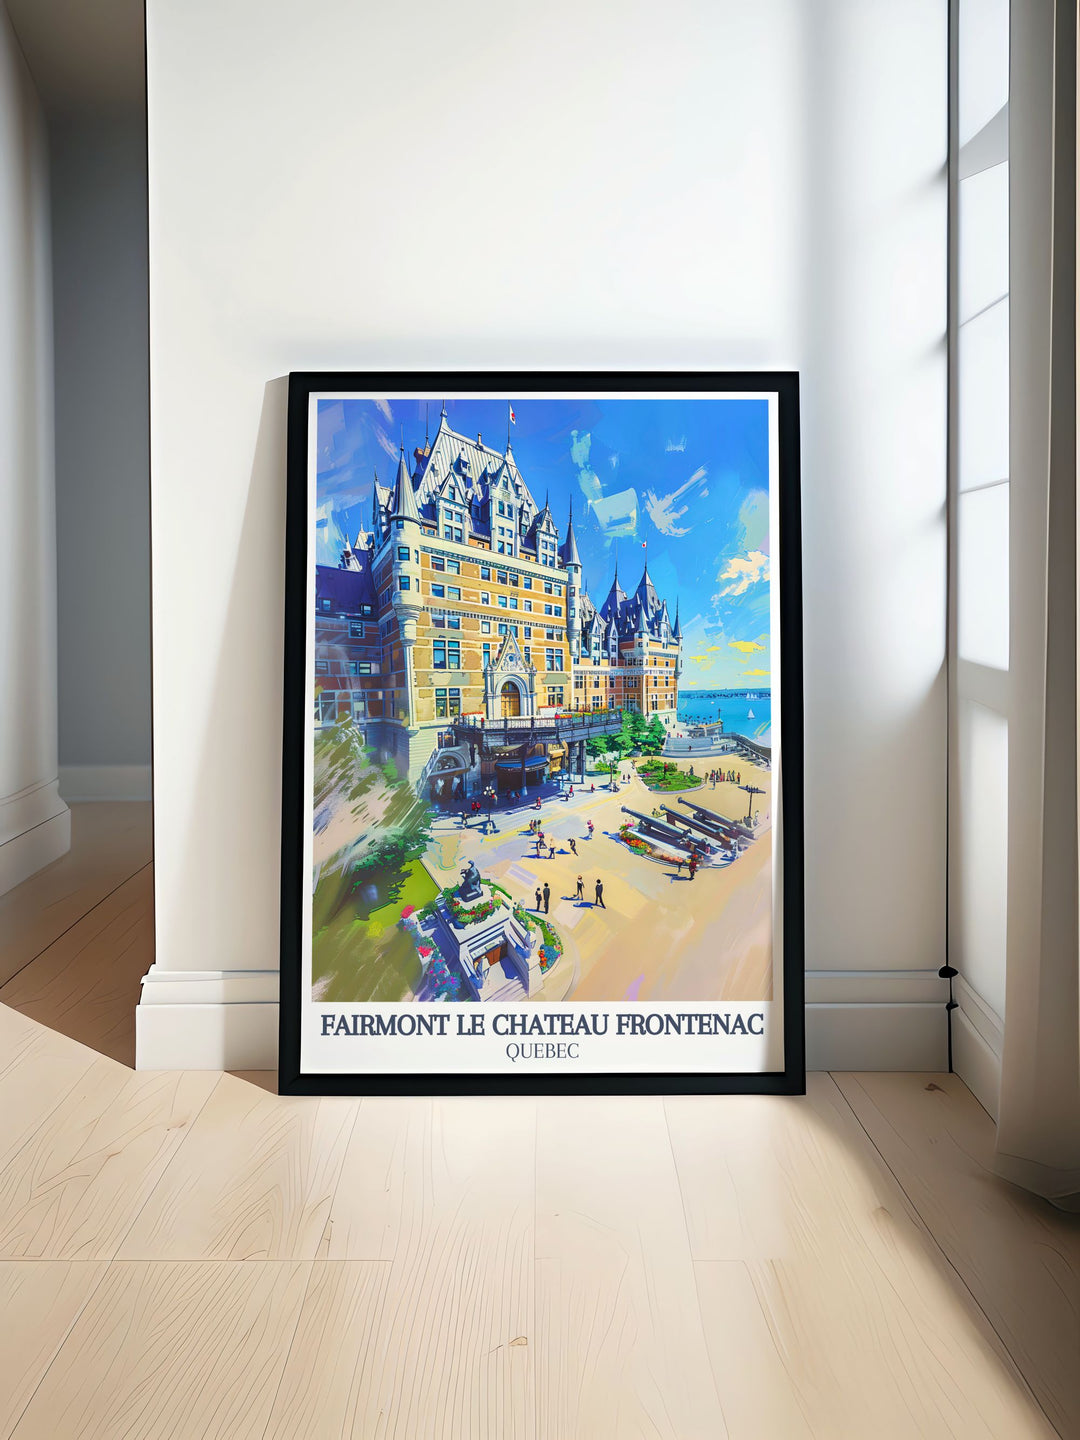 Le Chateau Frontenac poster featuring St. Lawrence River, The Chateau Frontenac Tower. Perfect Canada travel gift showcasing the stunning architecture and historical beauty of Quebec City with vibrant colors and detailed artwork.